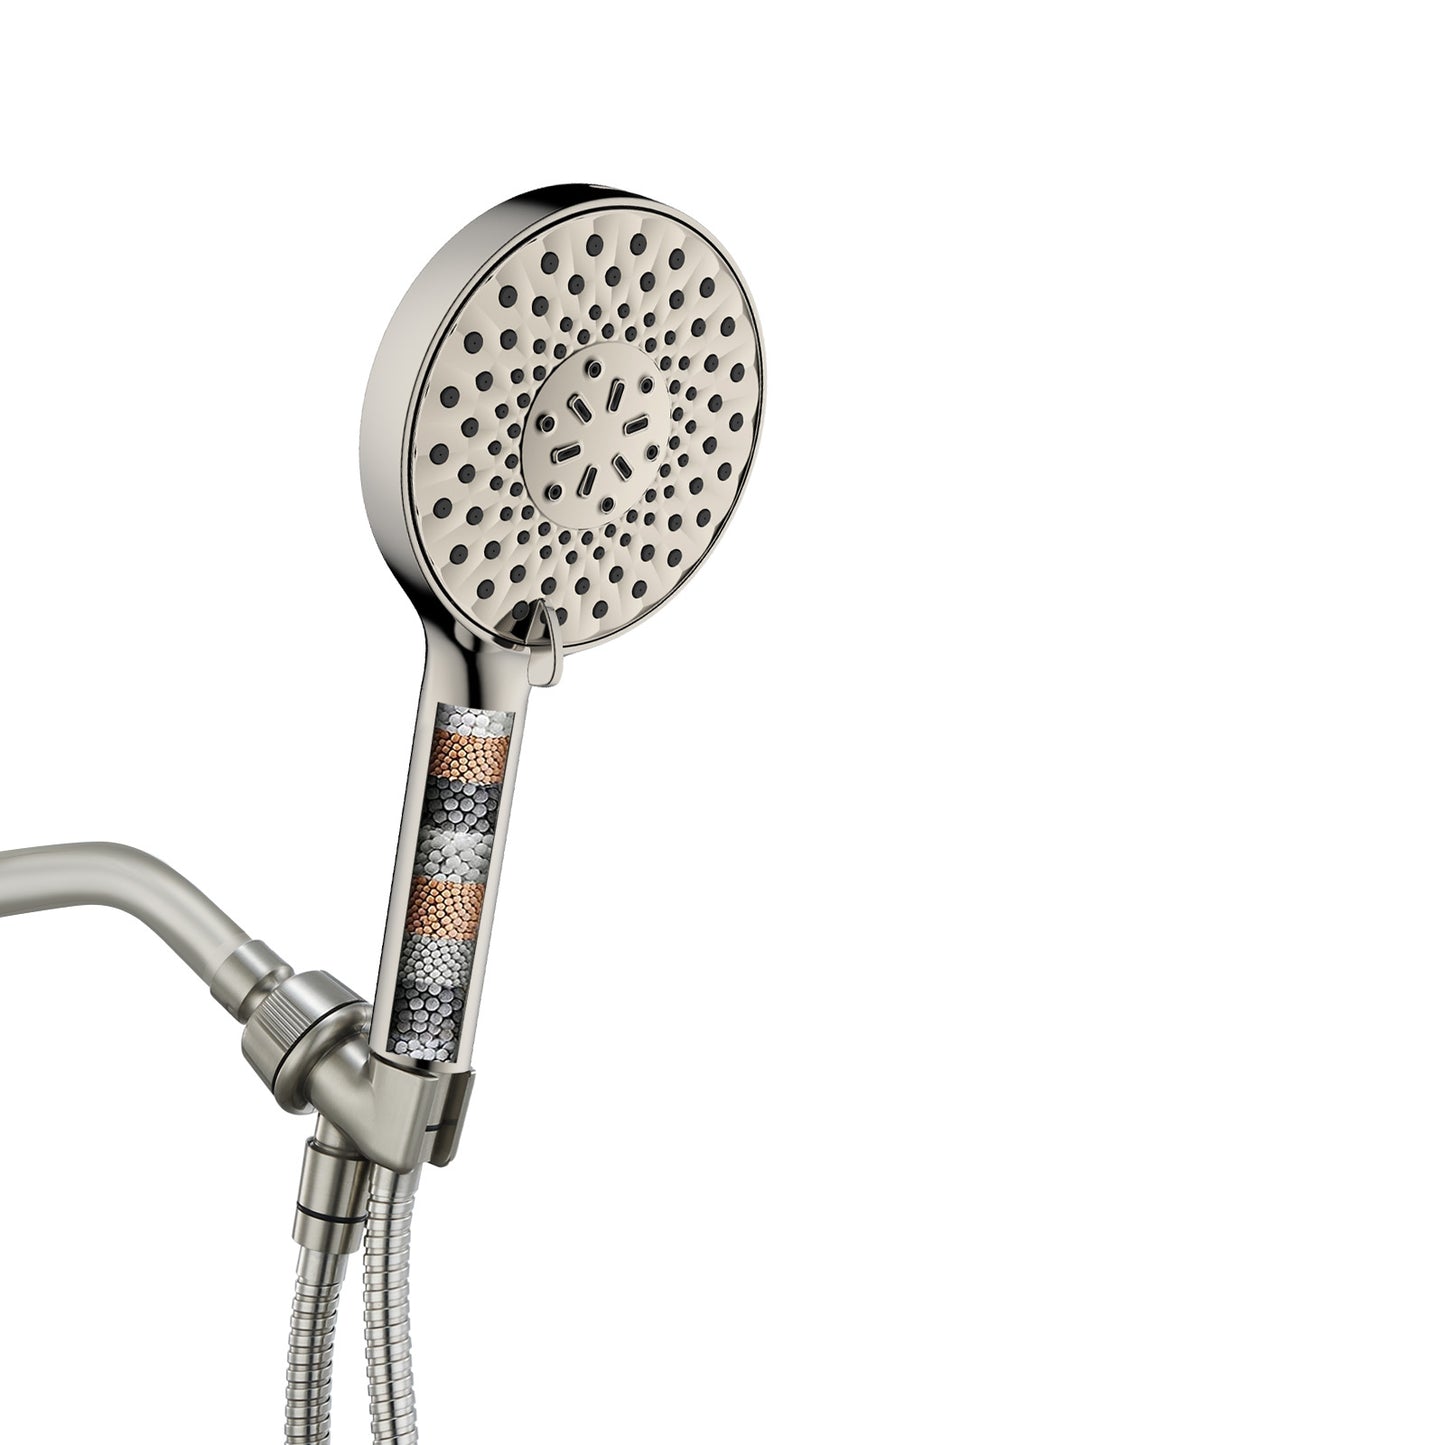 Ryamen Filtered Shower Head with Handheld，High Pressure 9 Spray Mode Showerhead with Hose,Bracket and Minerals Stones Replacement Filters for Hard Water,Anti-clog & Powerful to Clean